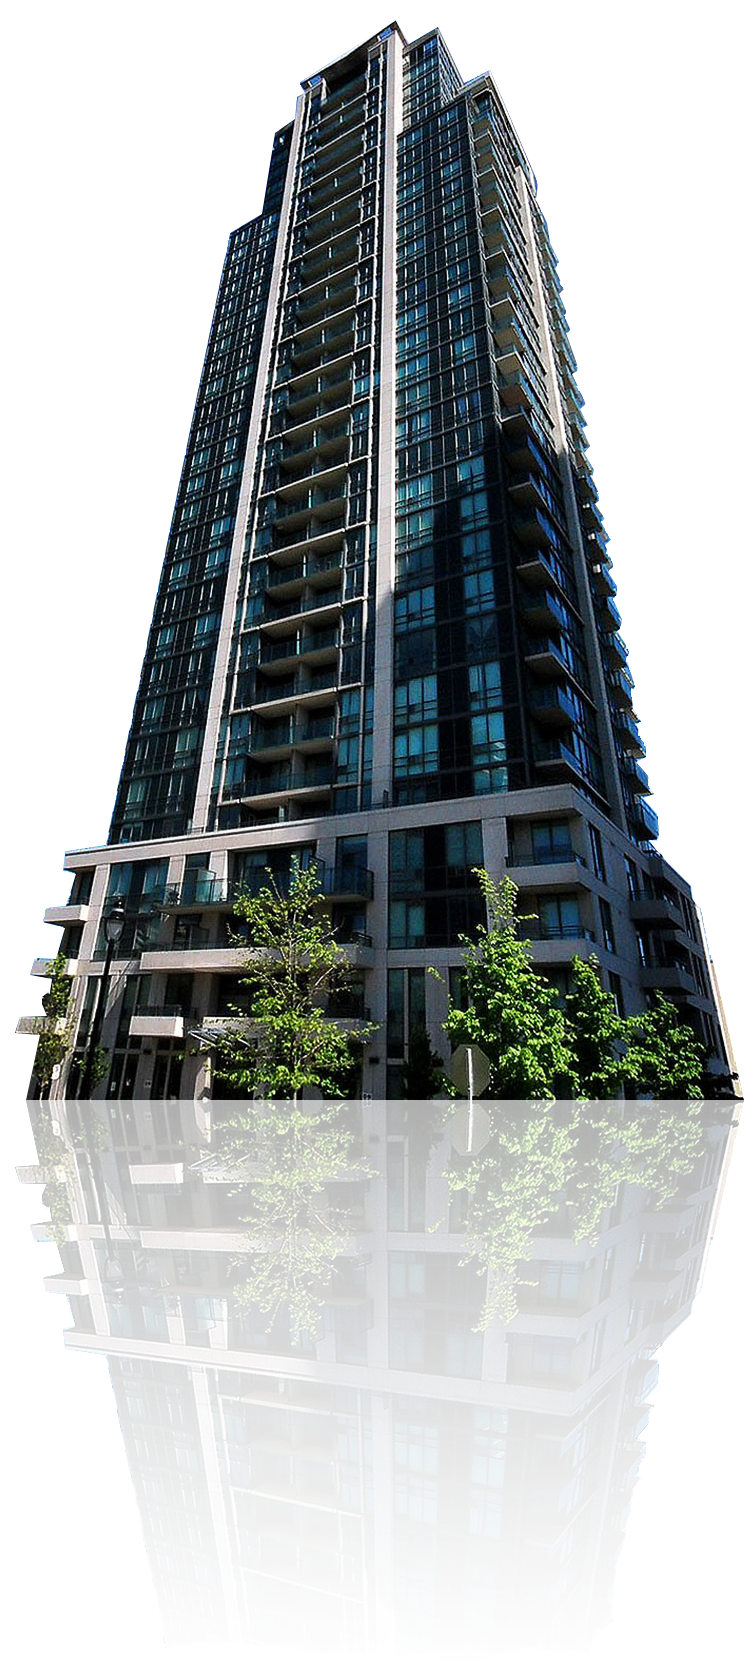 sell a mississauga condo Sell A Mississauga Condo With IVAN Real Estate sell a mississauga condo